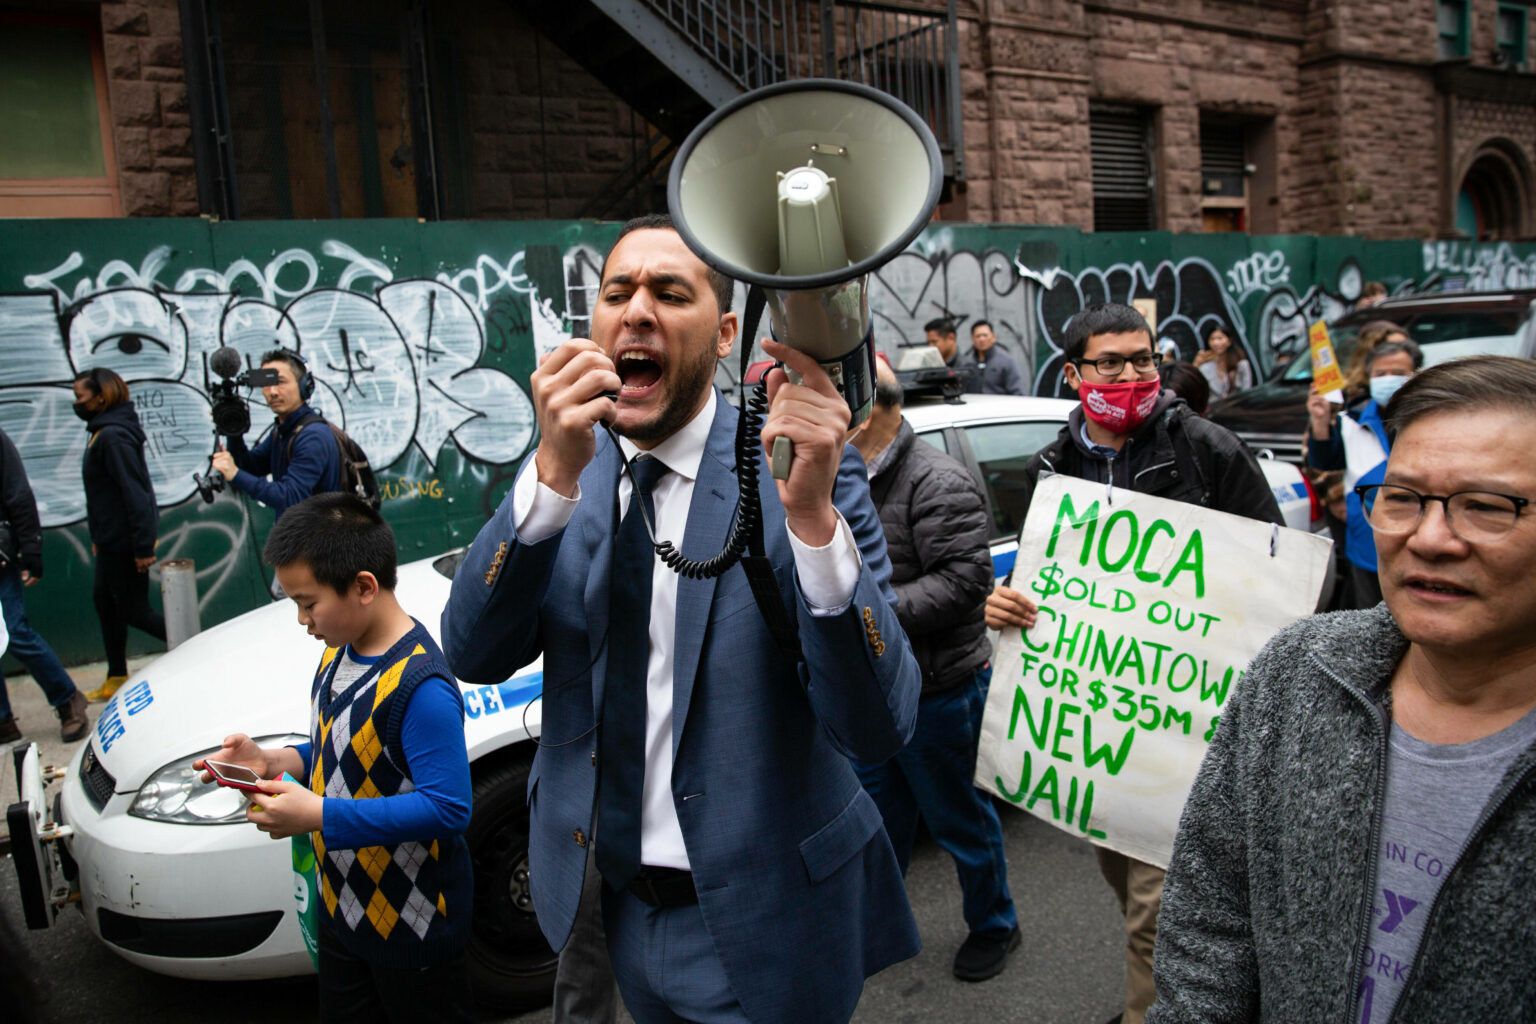 IMAGO / ZUMA Wire / Karla Cot. 20 March, 2022, New York City, USA. Approximately 900 community members and elected officials participated in a march and rally at Columbus Park in Chinatown demonstrating against the construction of a $2.3 billion mega jail, slated to be the tallest in the world.